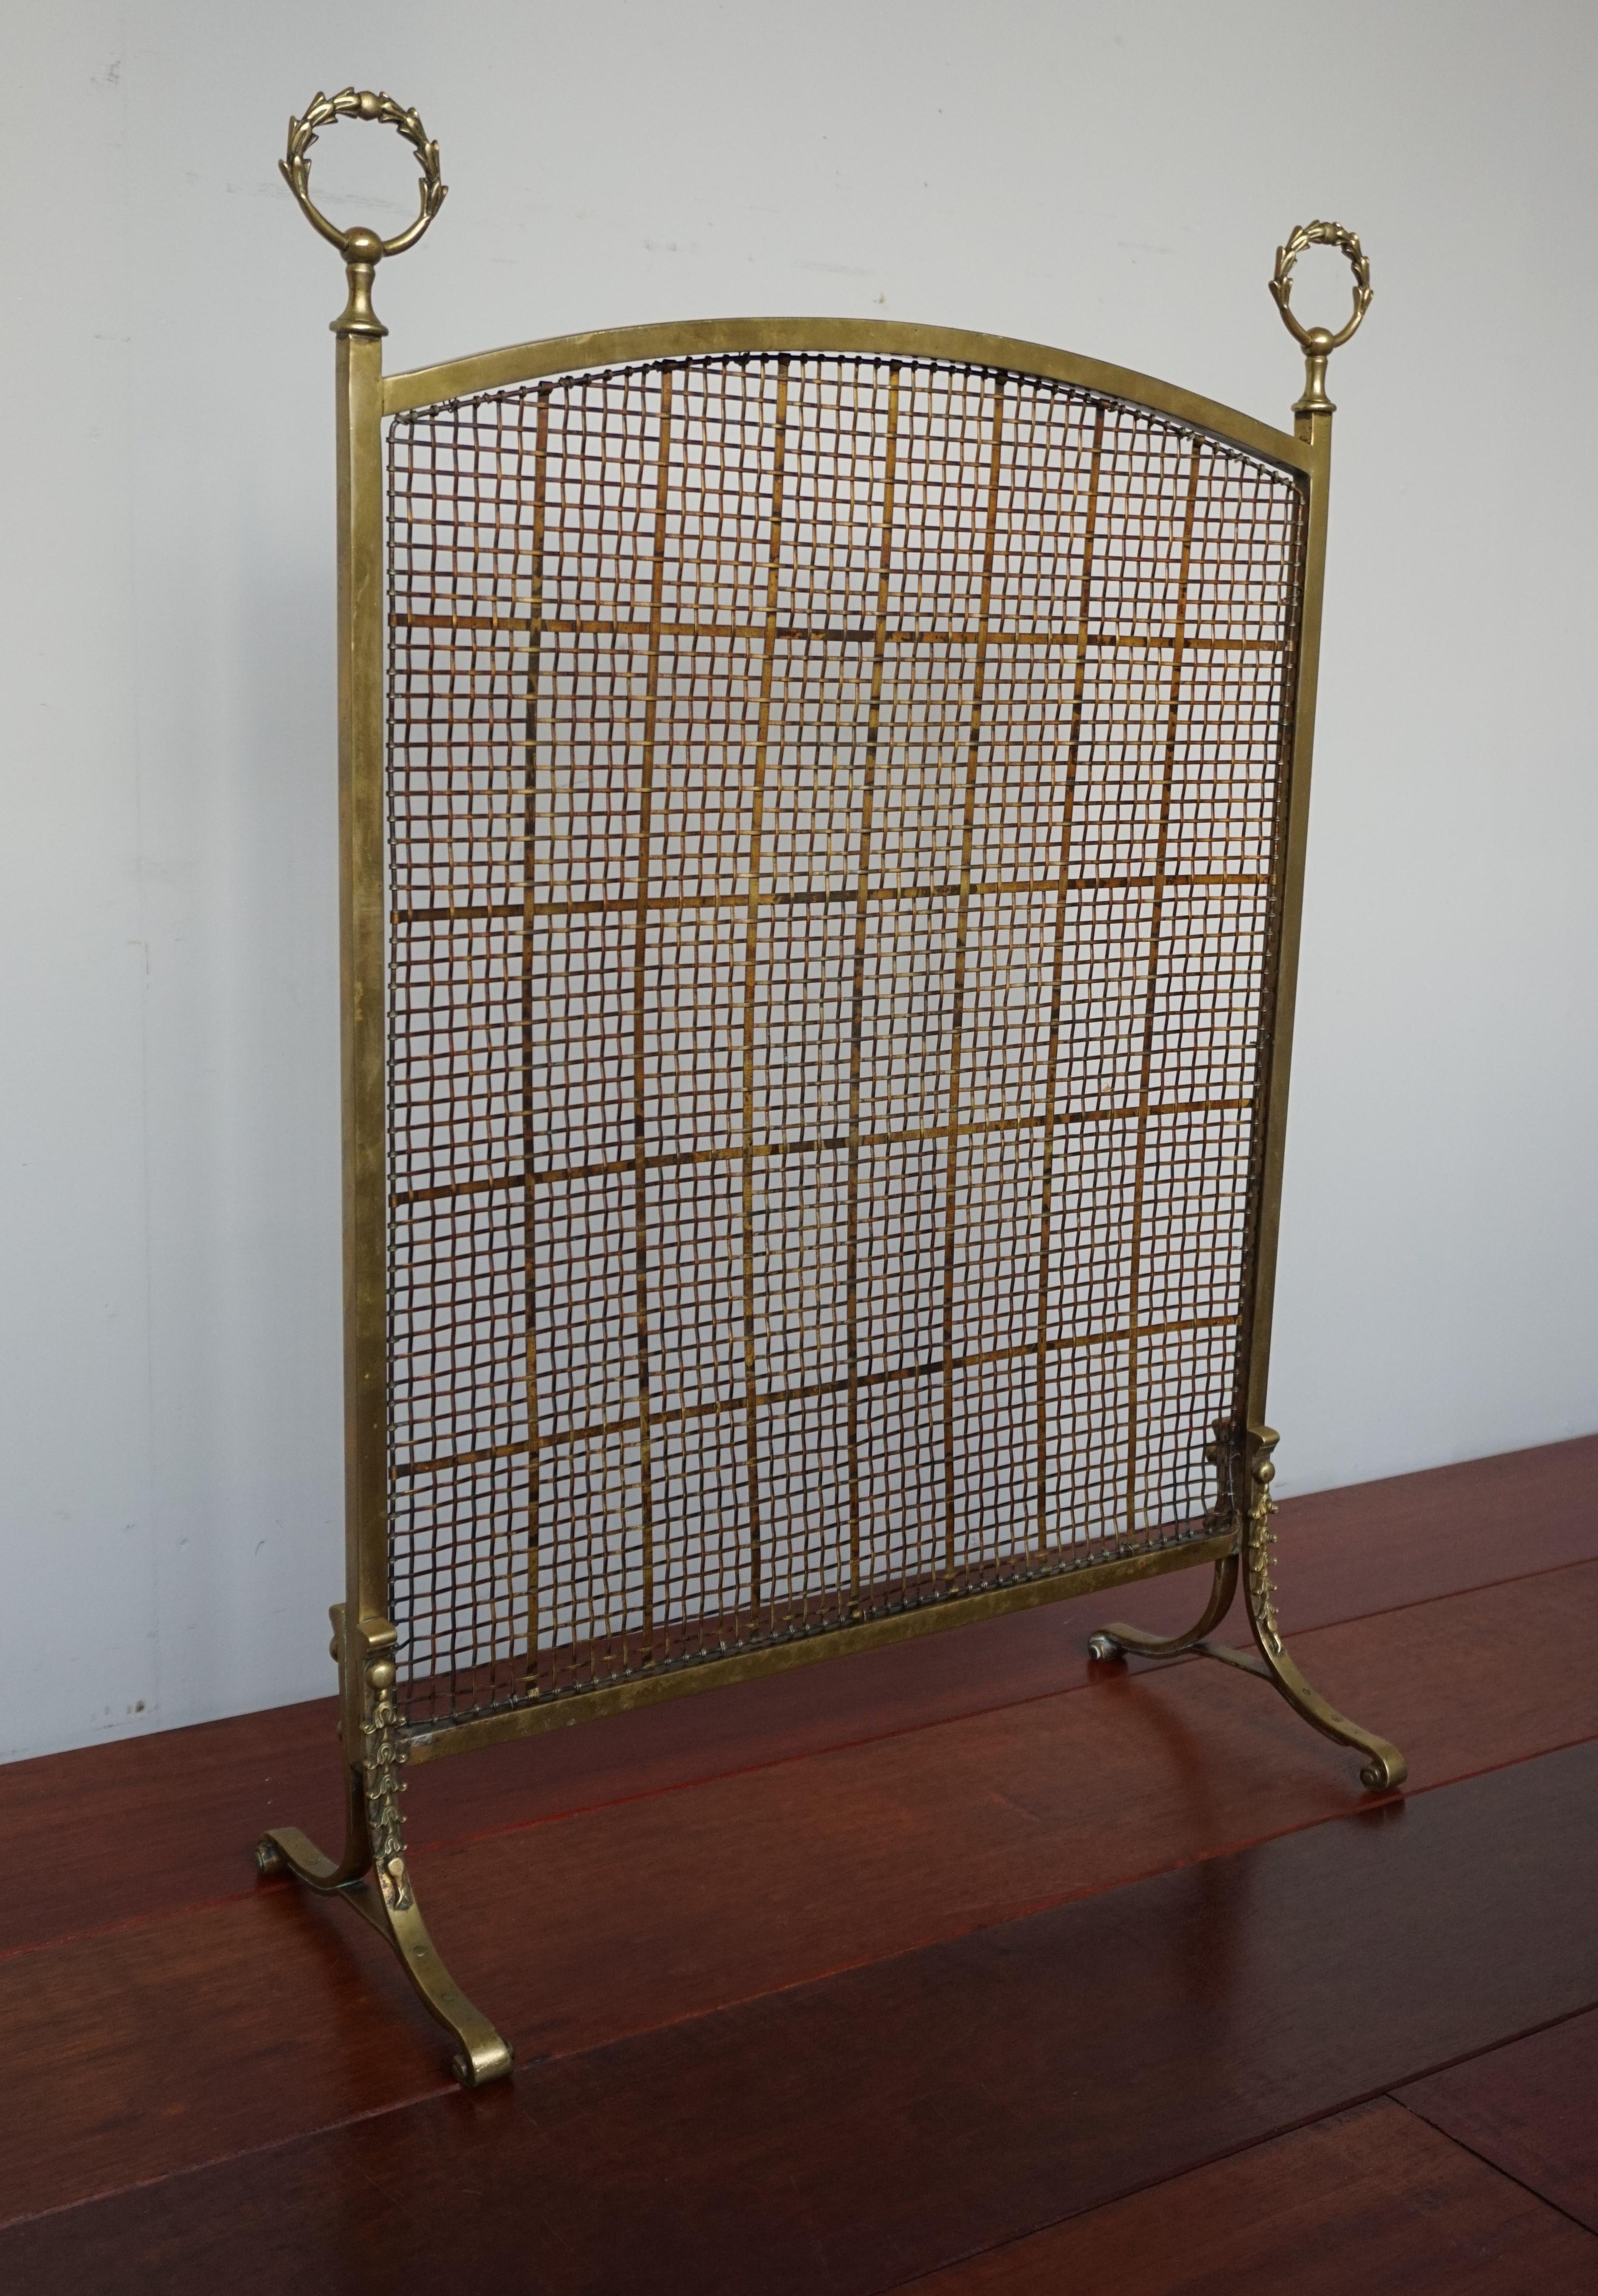 Stylish hand-crafted firescreen from the late 1800s with wreath crown decorations.

If this beautifully hand-crafted 19th century firescreen is the right style to fit your fireplace and the size is correct for your needs then you could hardly wish